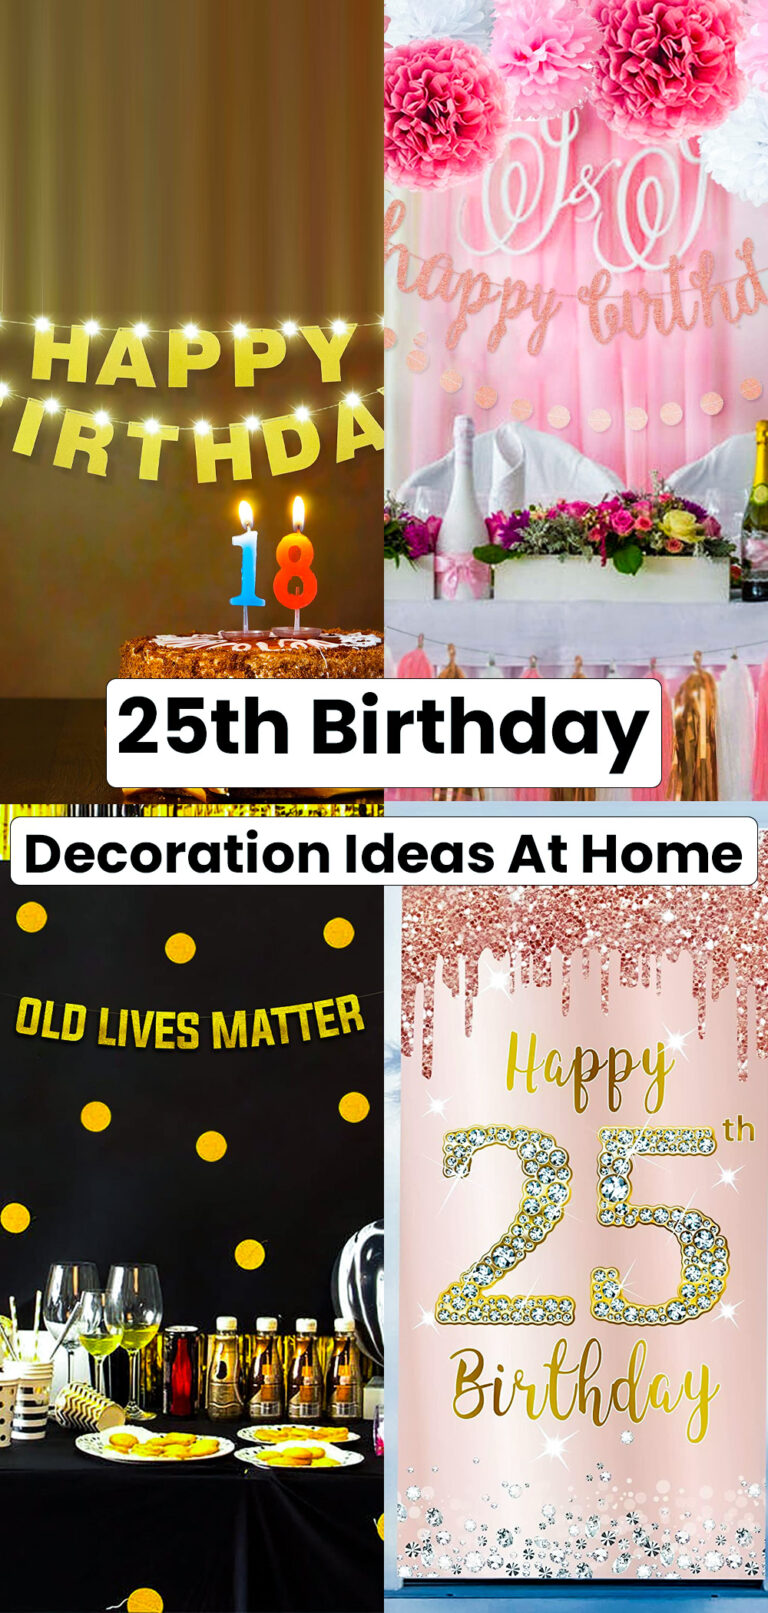 25th Birthday Decoration Ideas at Home